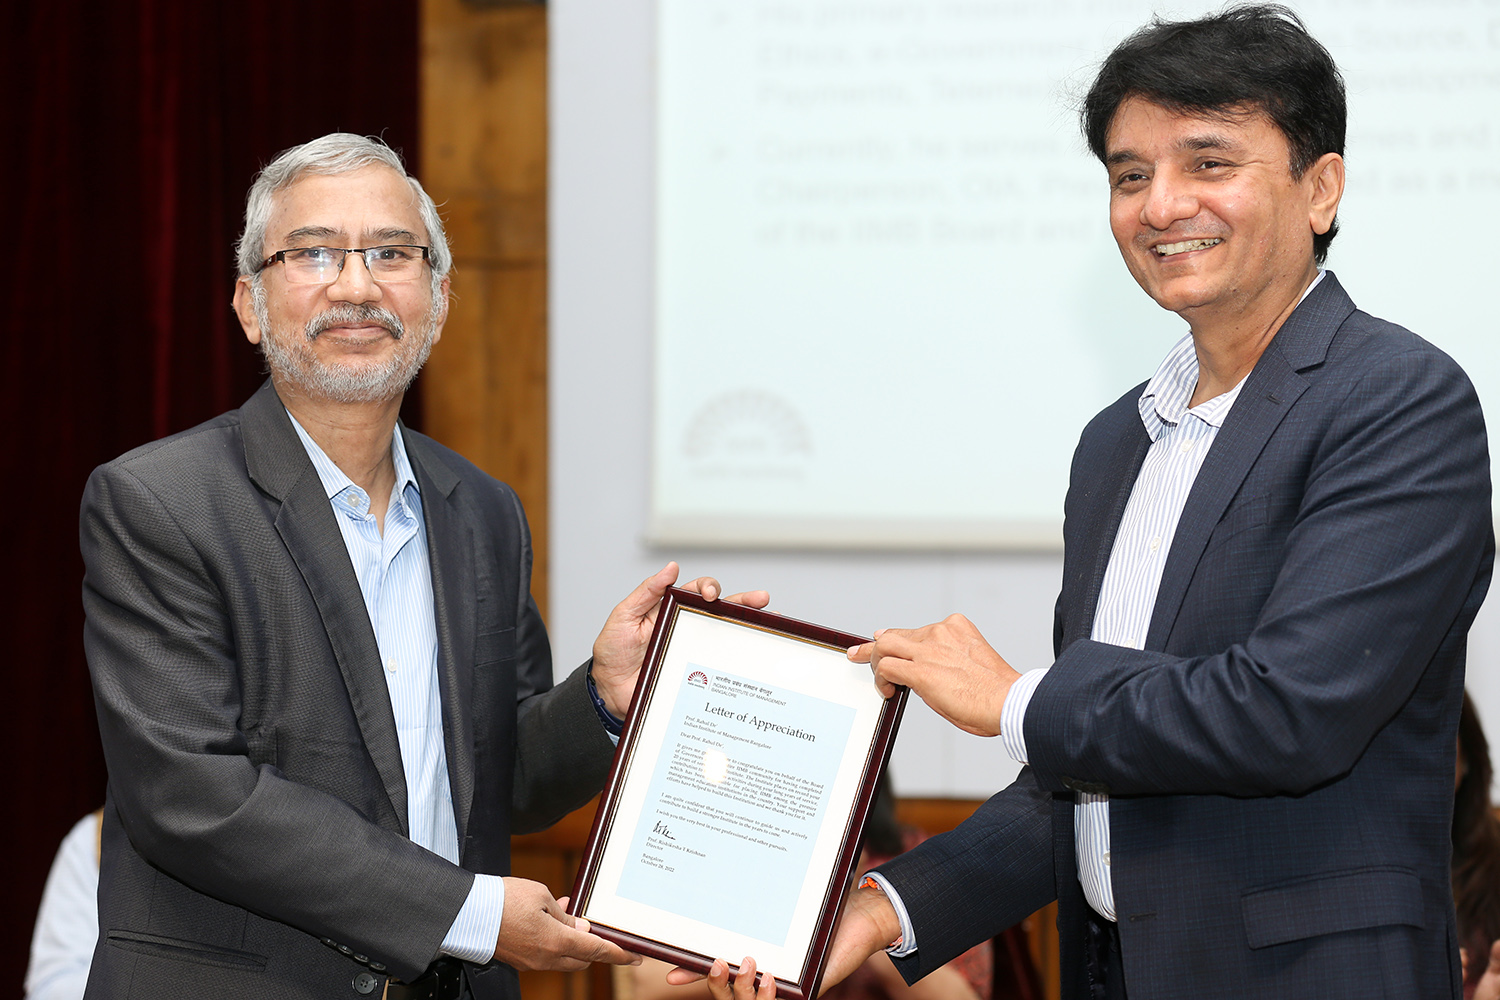 Professor Rahul Dé, Dean, Programmes and faculty in the Information Systems area, receives the award for 20 years of service from Mr MD Ranganath, Member of the Board of Governors, IIMB, during the institute’s 49th Foundation Day celebrations.